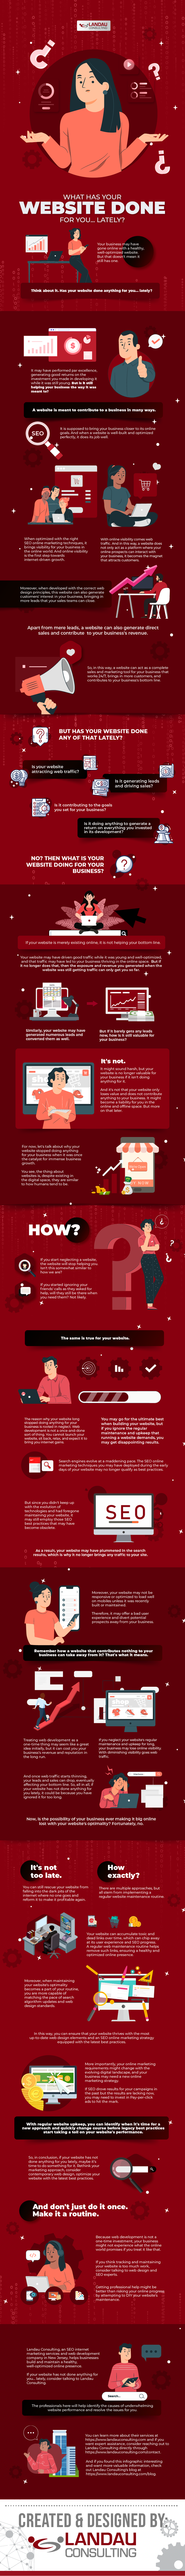 What-Has-Your-Website-Done-for-You-Lately-Infographic-Image